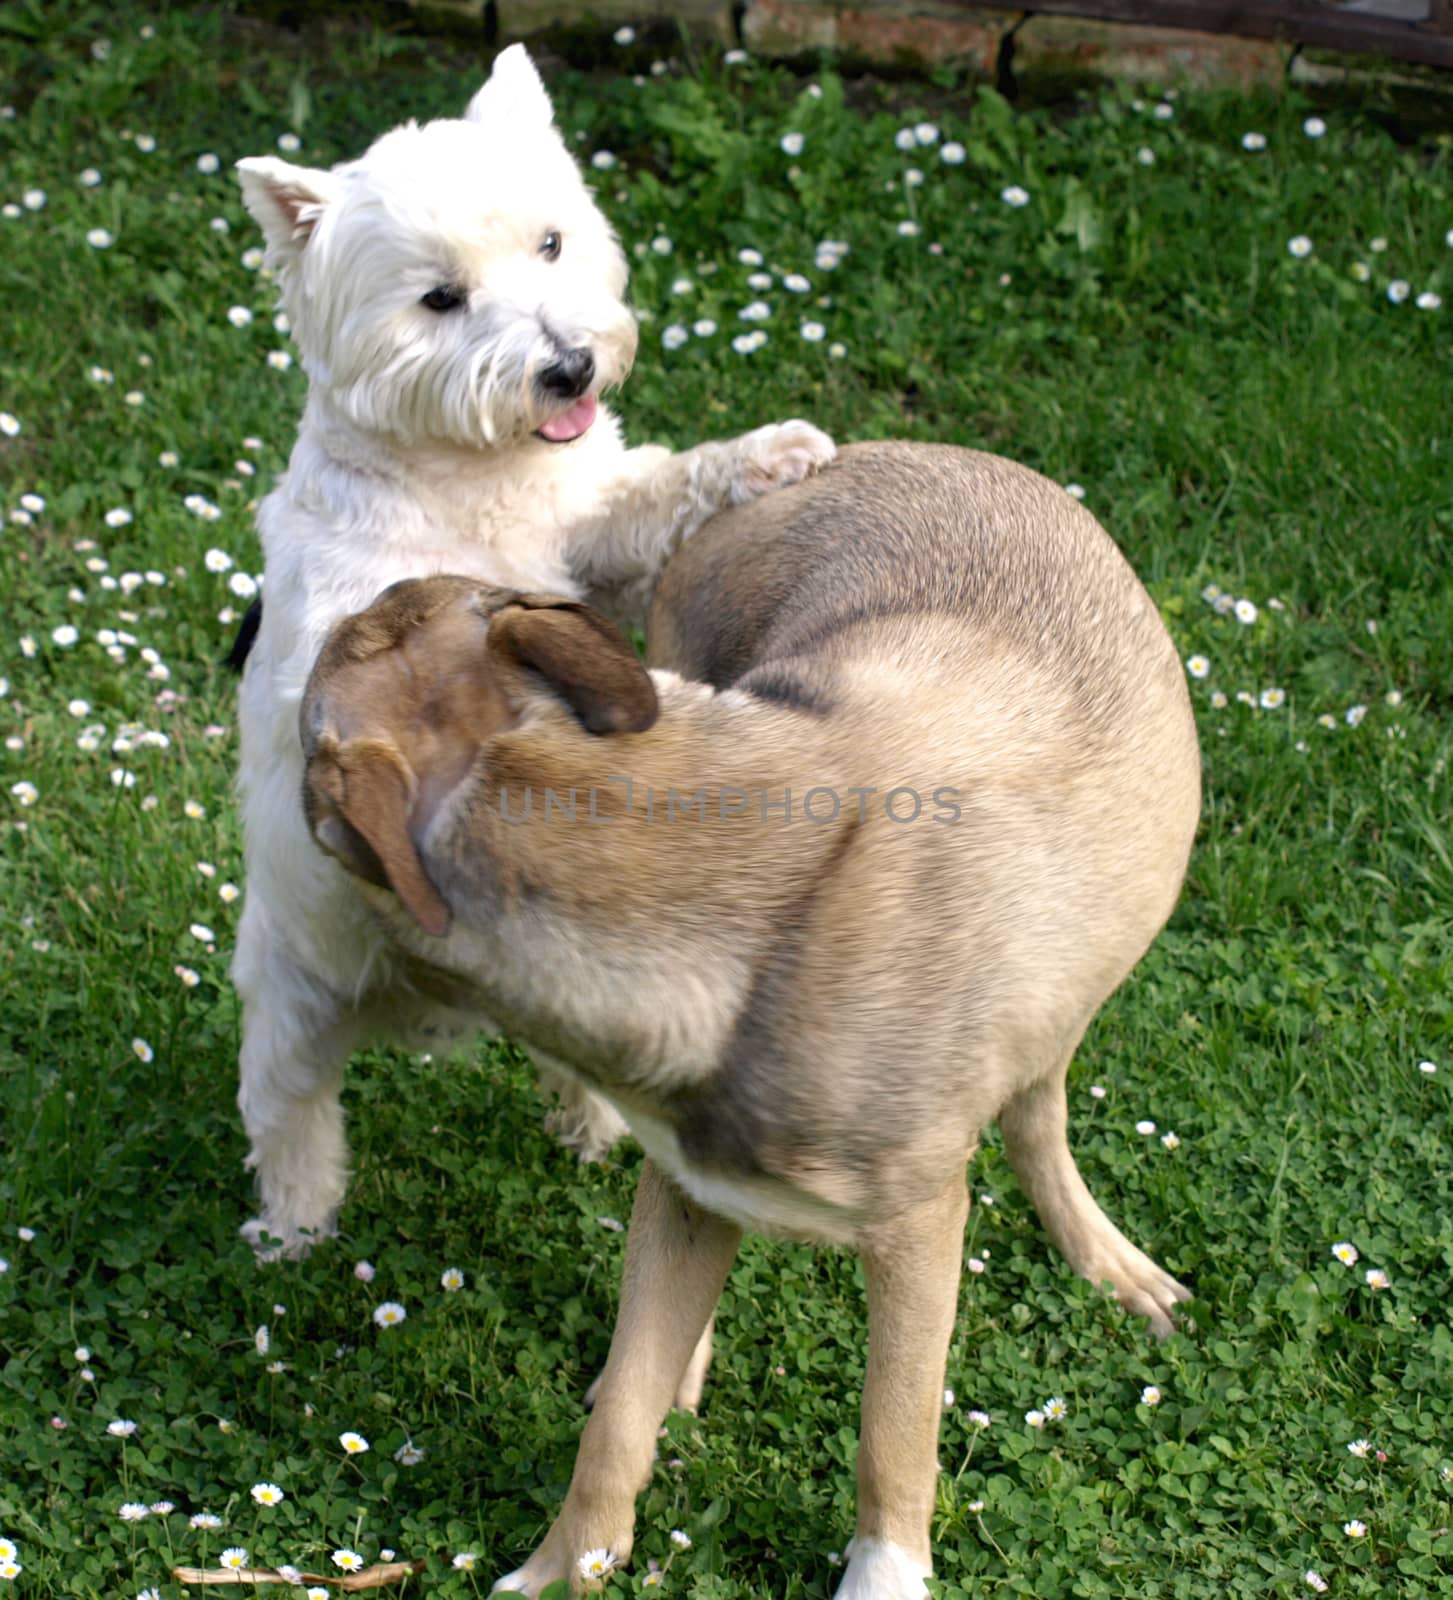 two dogs in a friendly game   